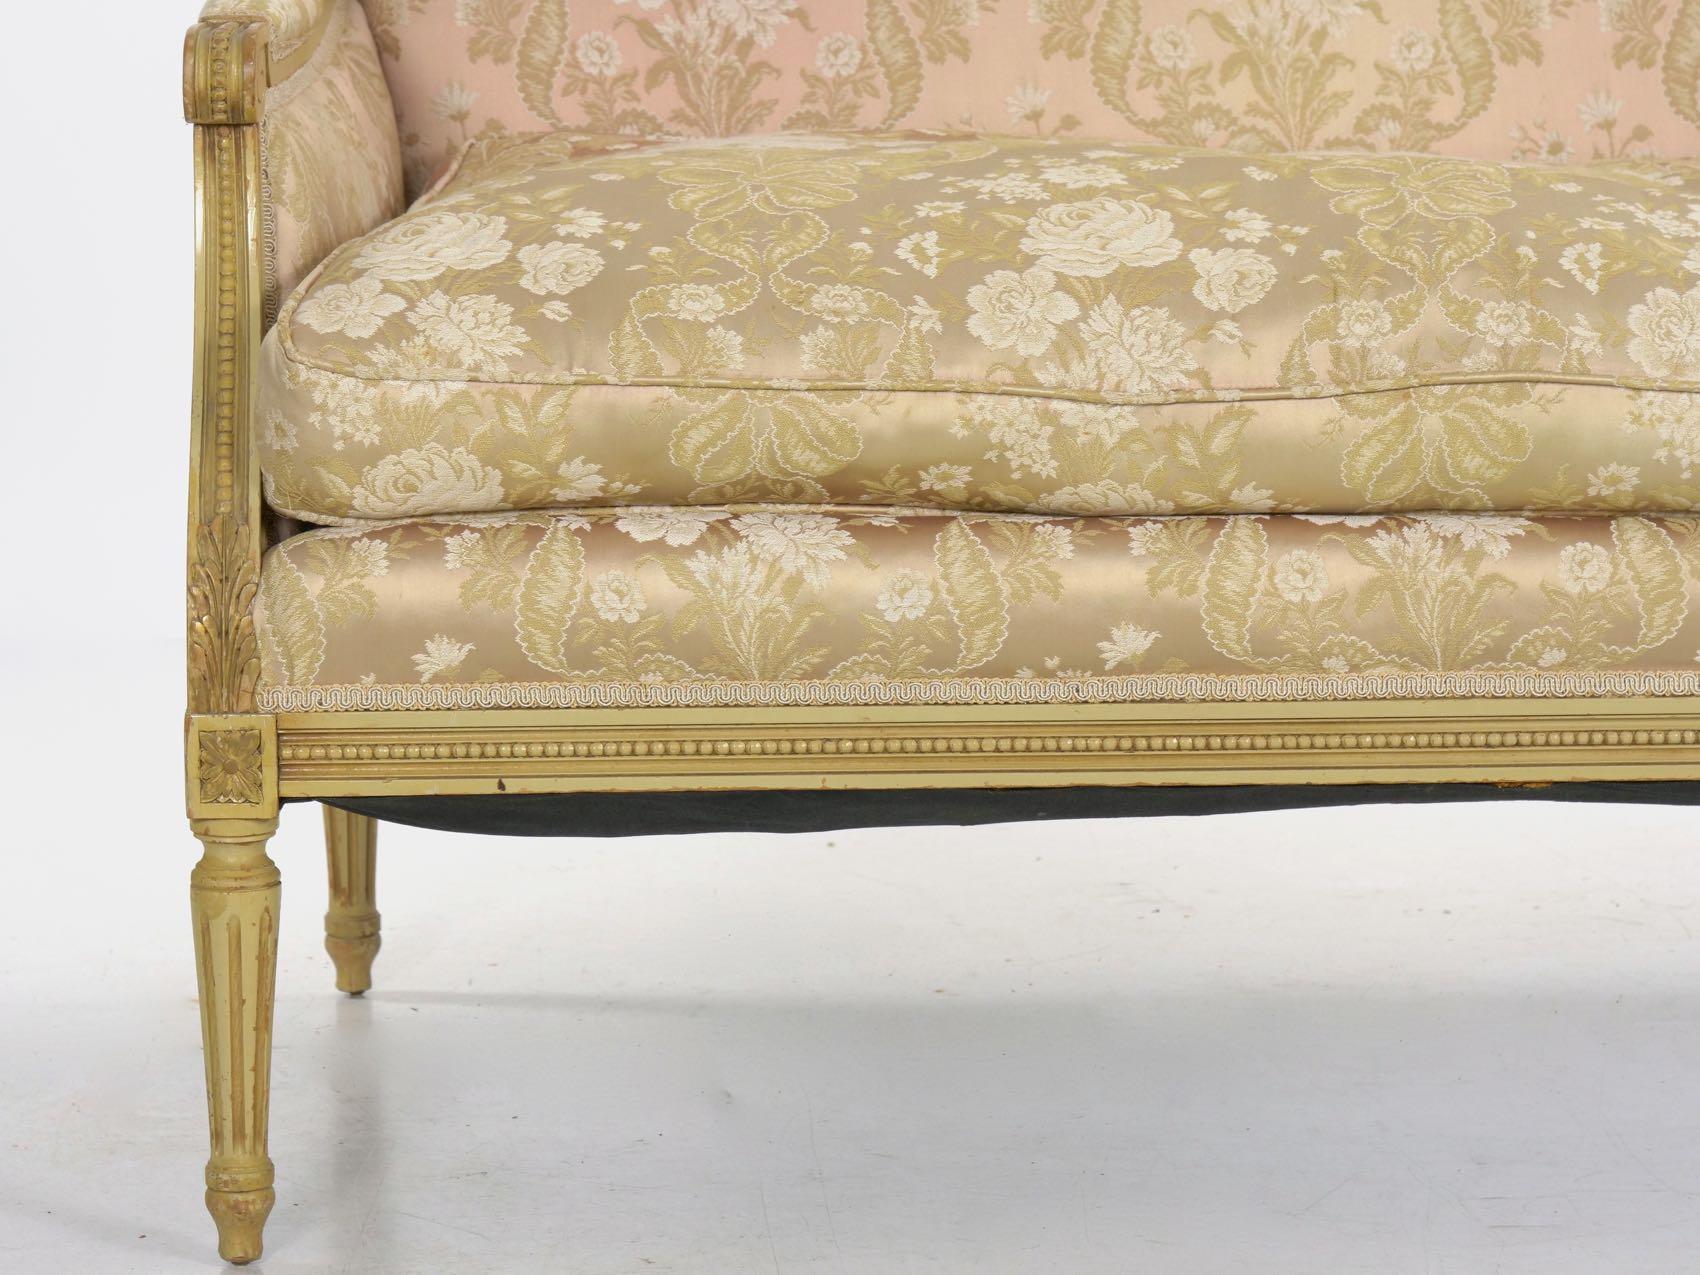 Lacquered French Louis XVI Style Carved Beech White Painted Antique Sofa Settee Loveseat